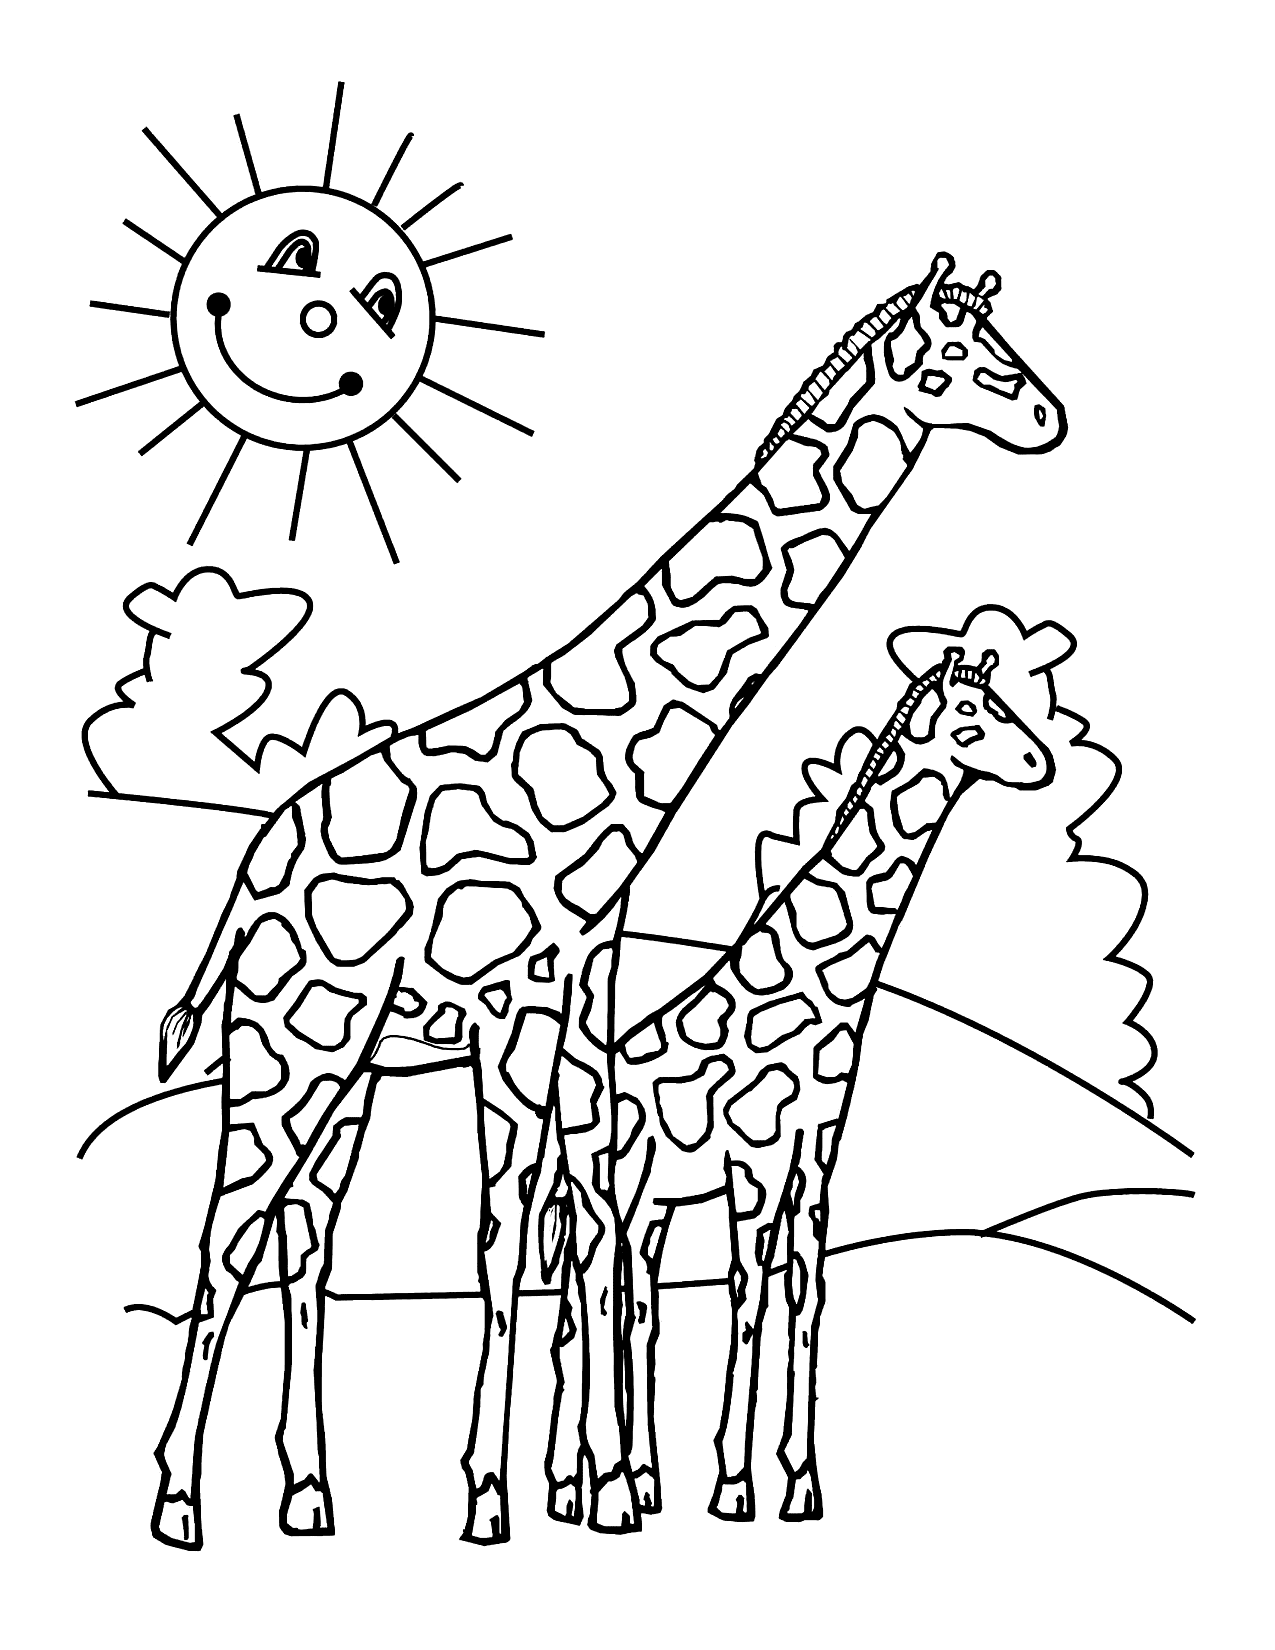 Two Cute Giraffe Under The Smiling Sun Coloring Page